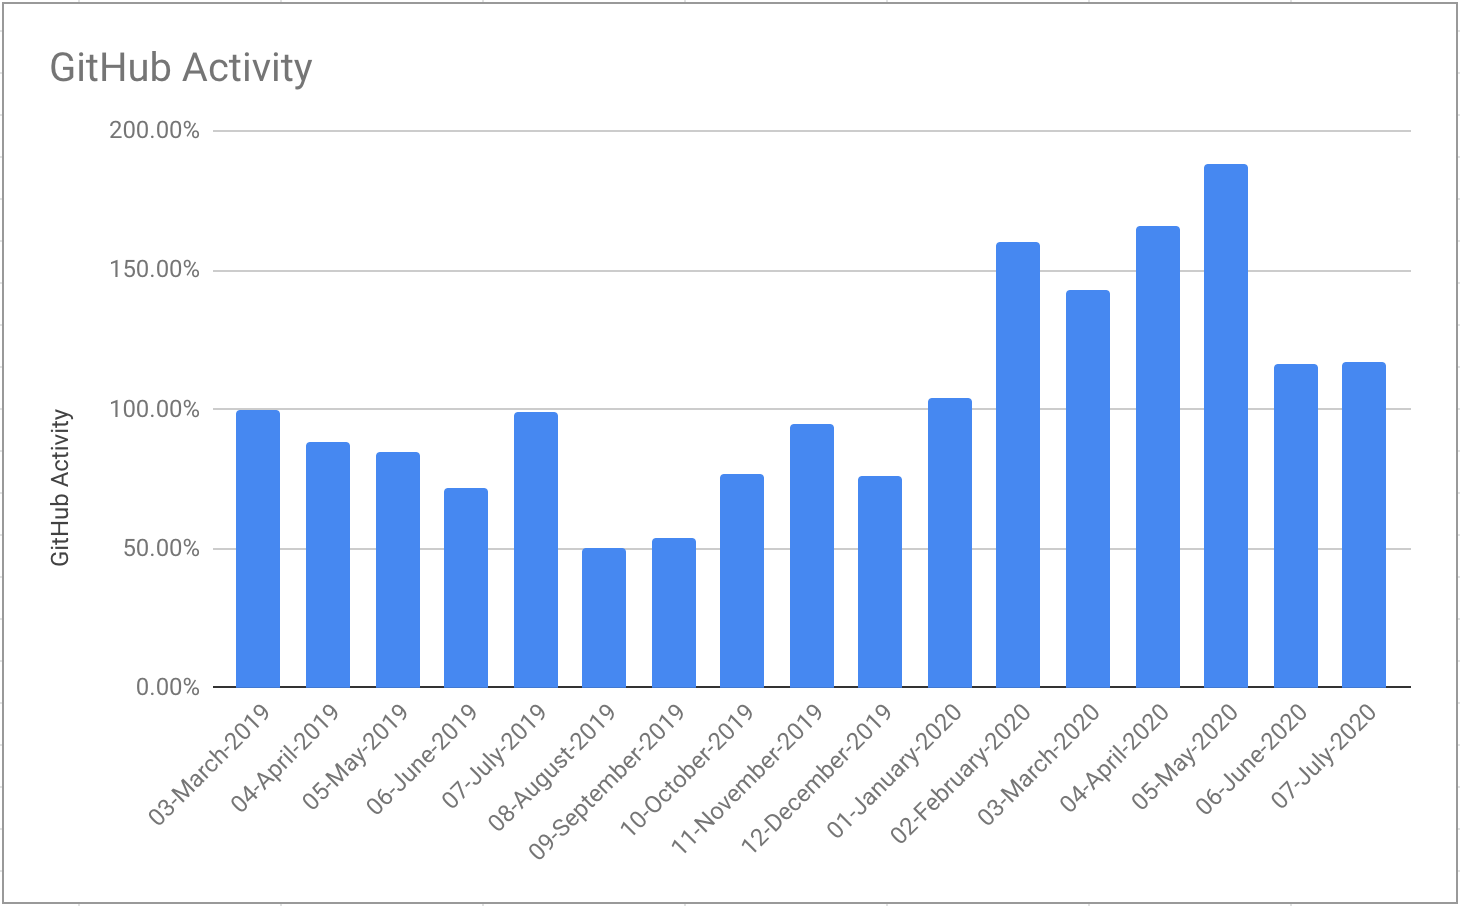 GitHub activity normalized against the first month